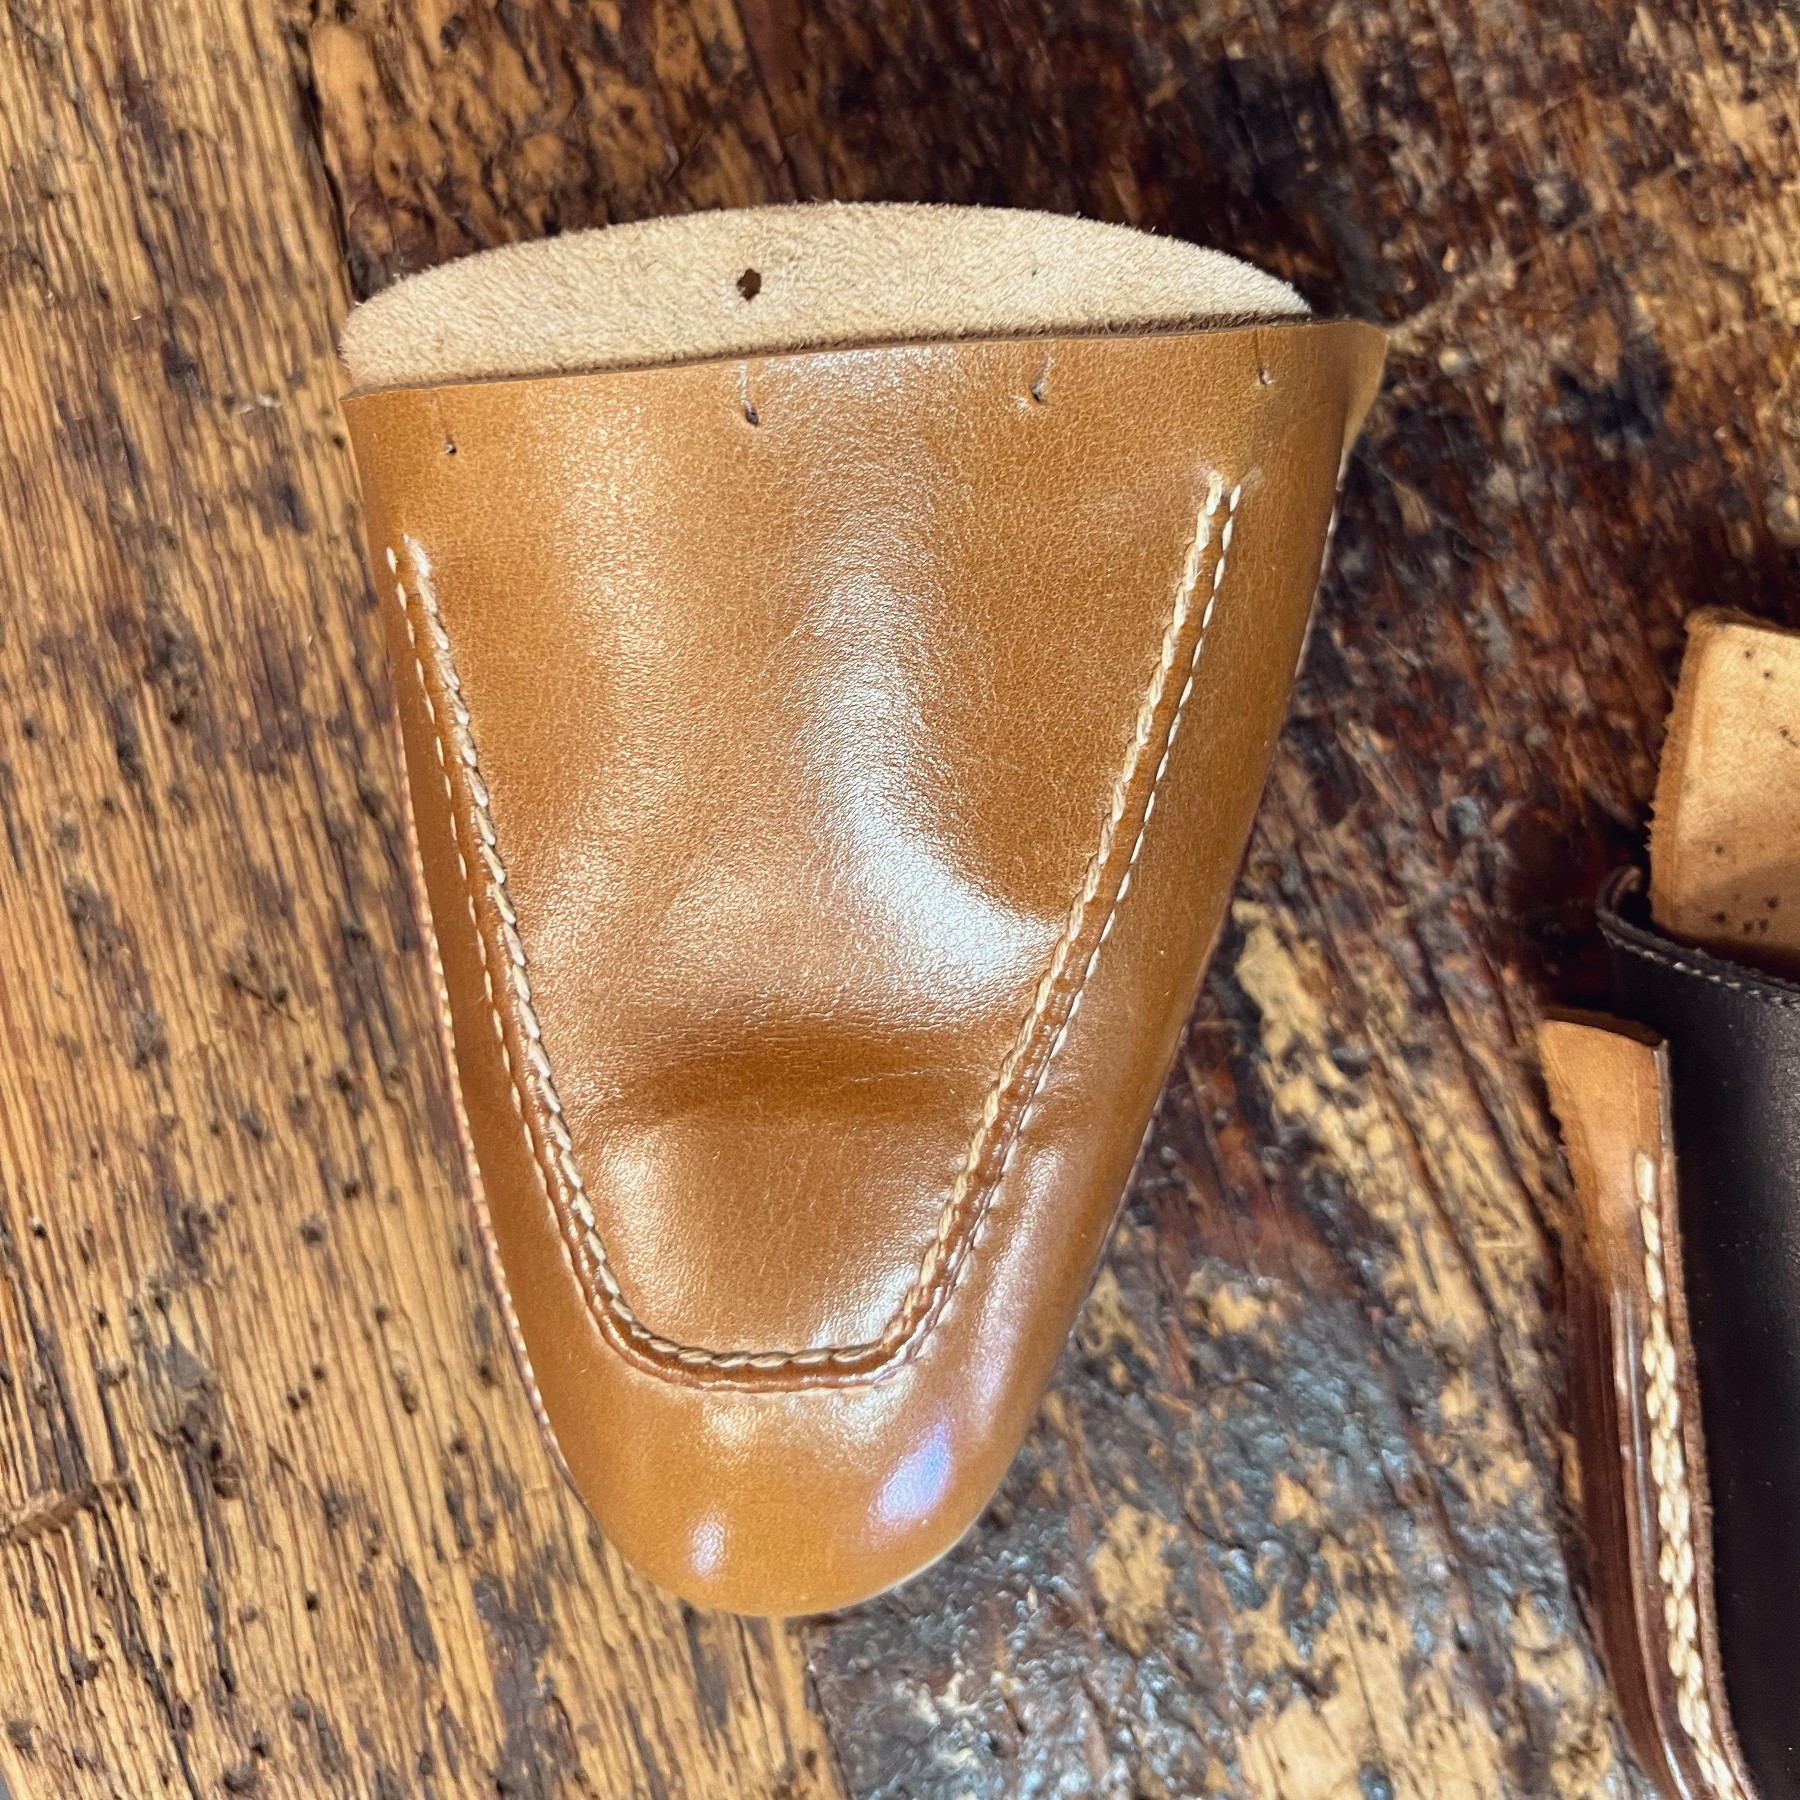 partially made toe portion of a leather shoe